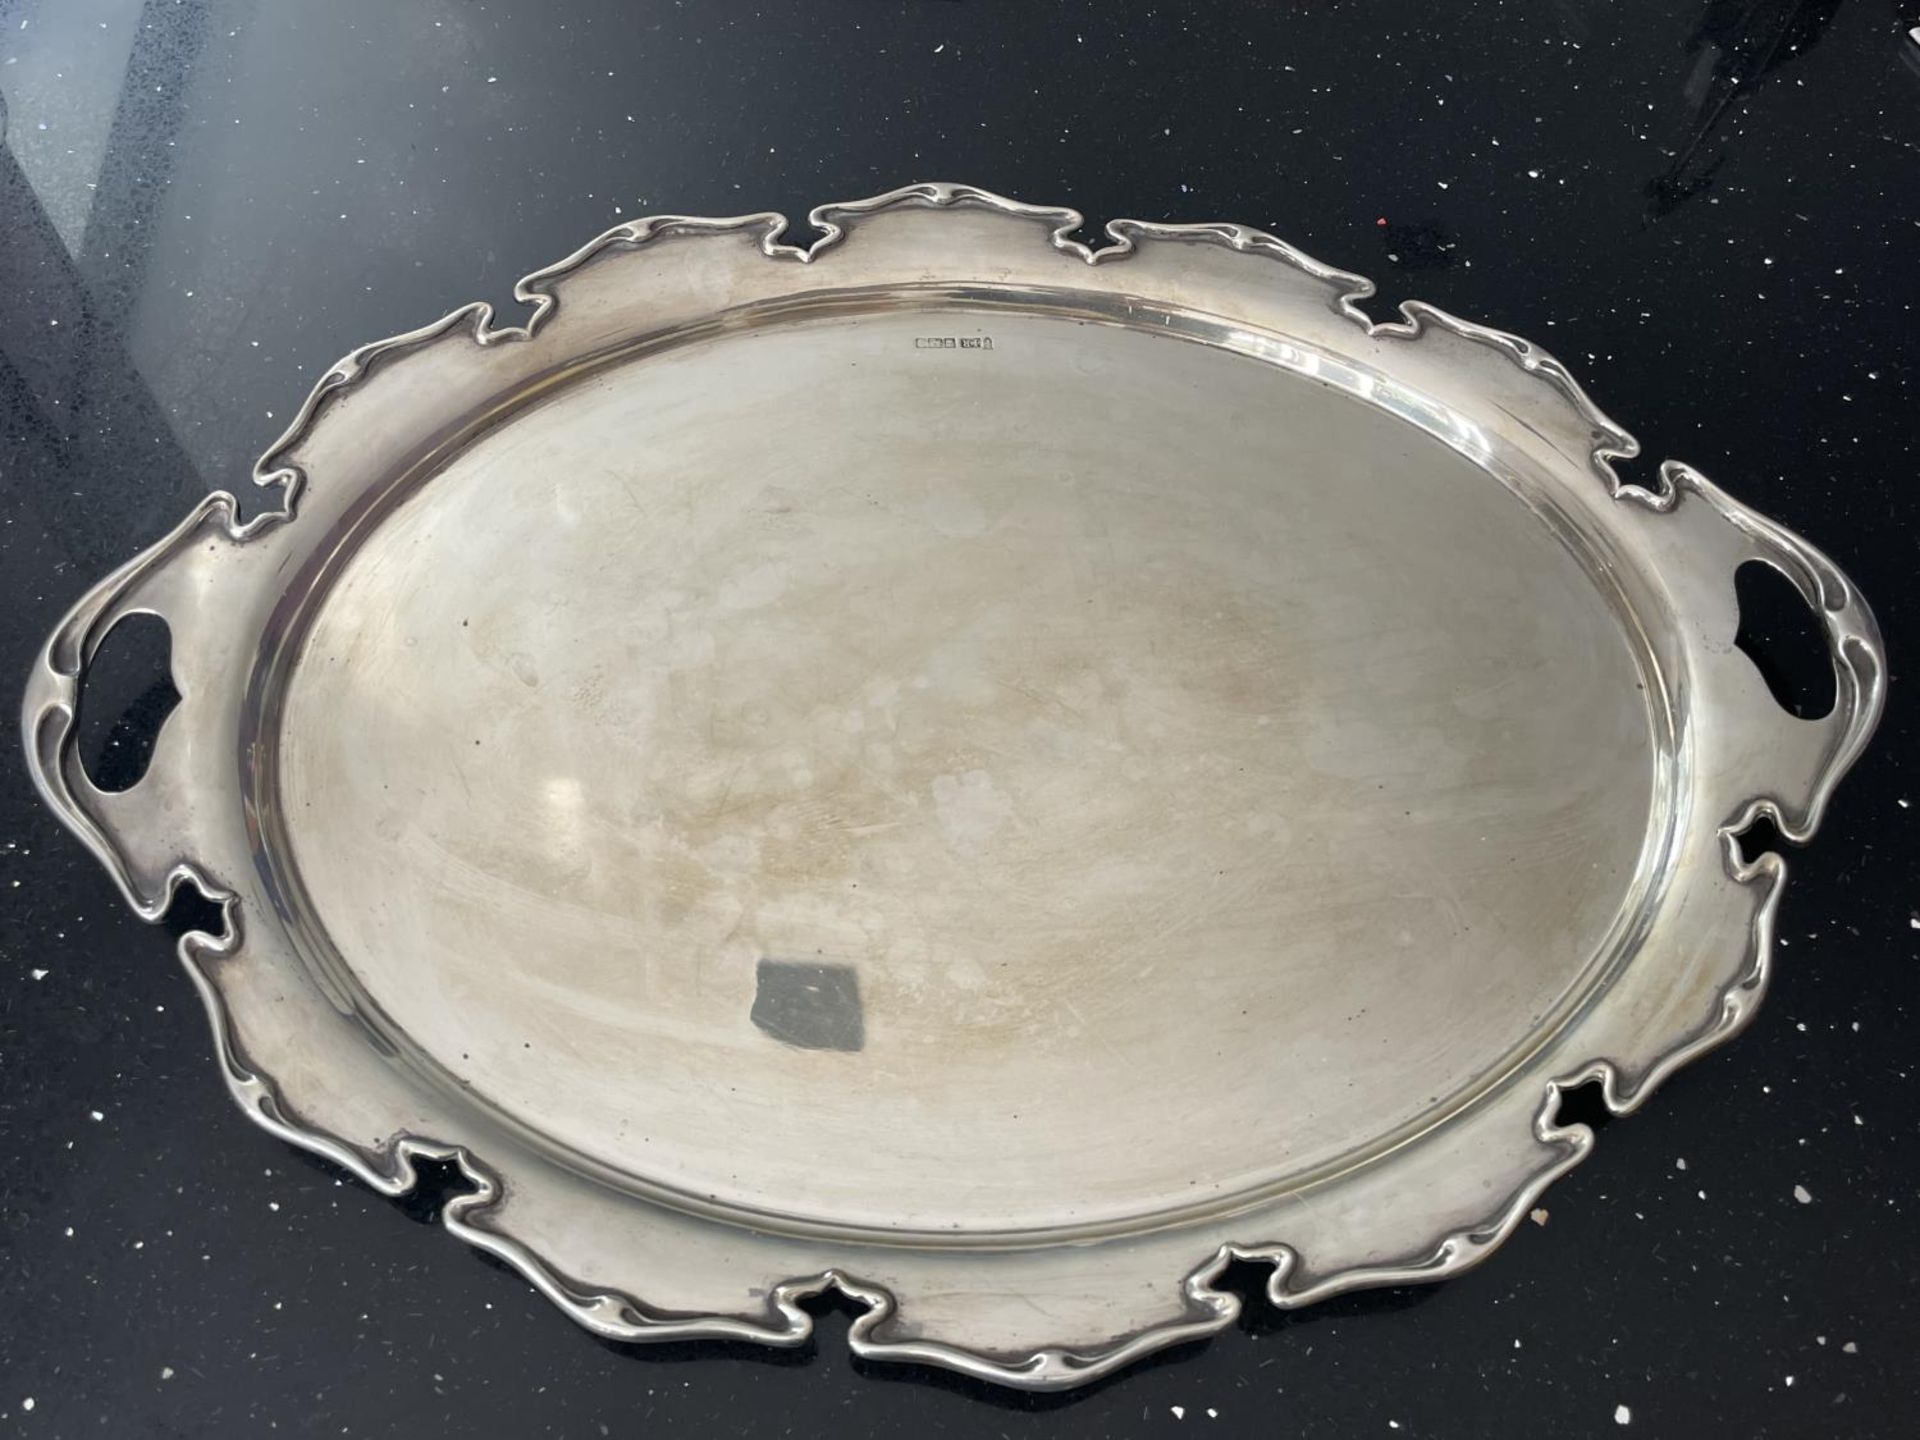 A LARGE HALLMARKED LONDON SILVER TWIN HANDLED TRAY L:57.5CM W:42.5CM GROSS WEIGHT 2374 GRAMS